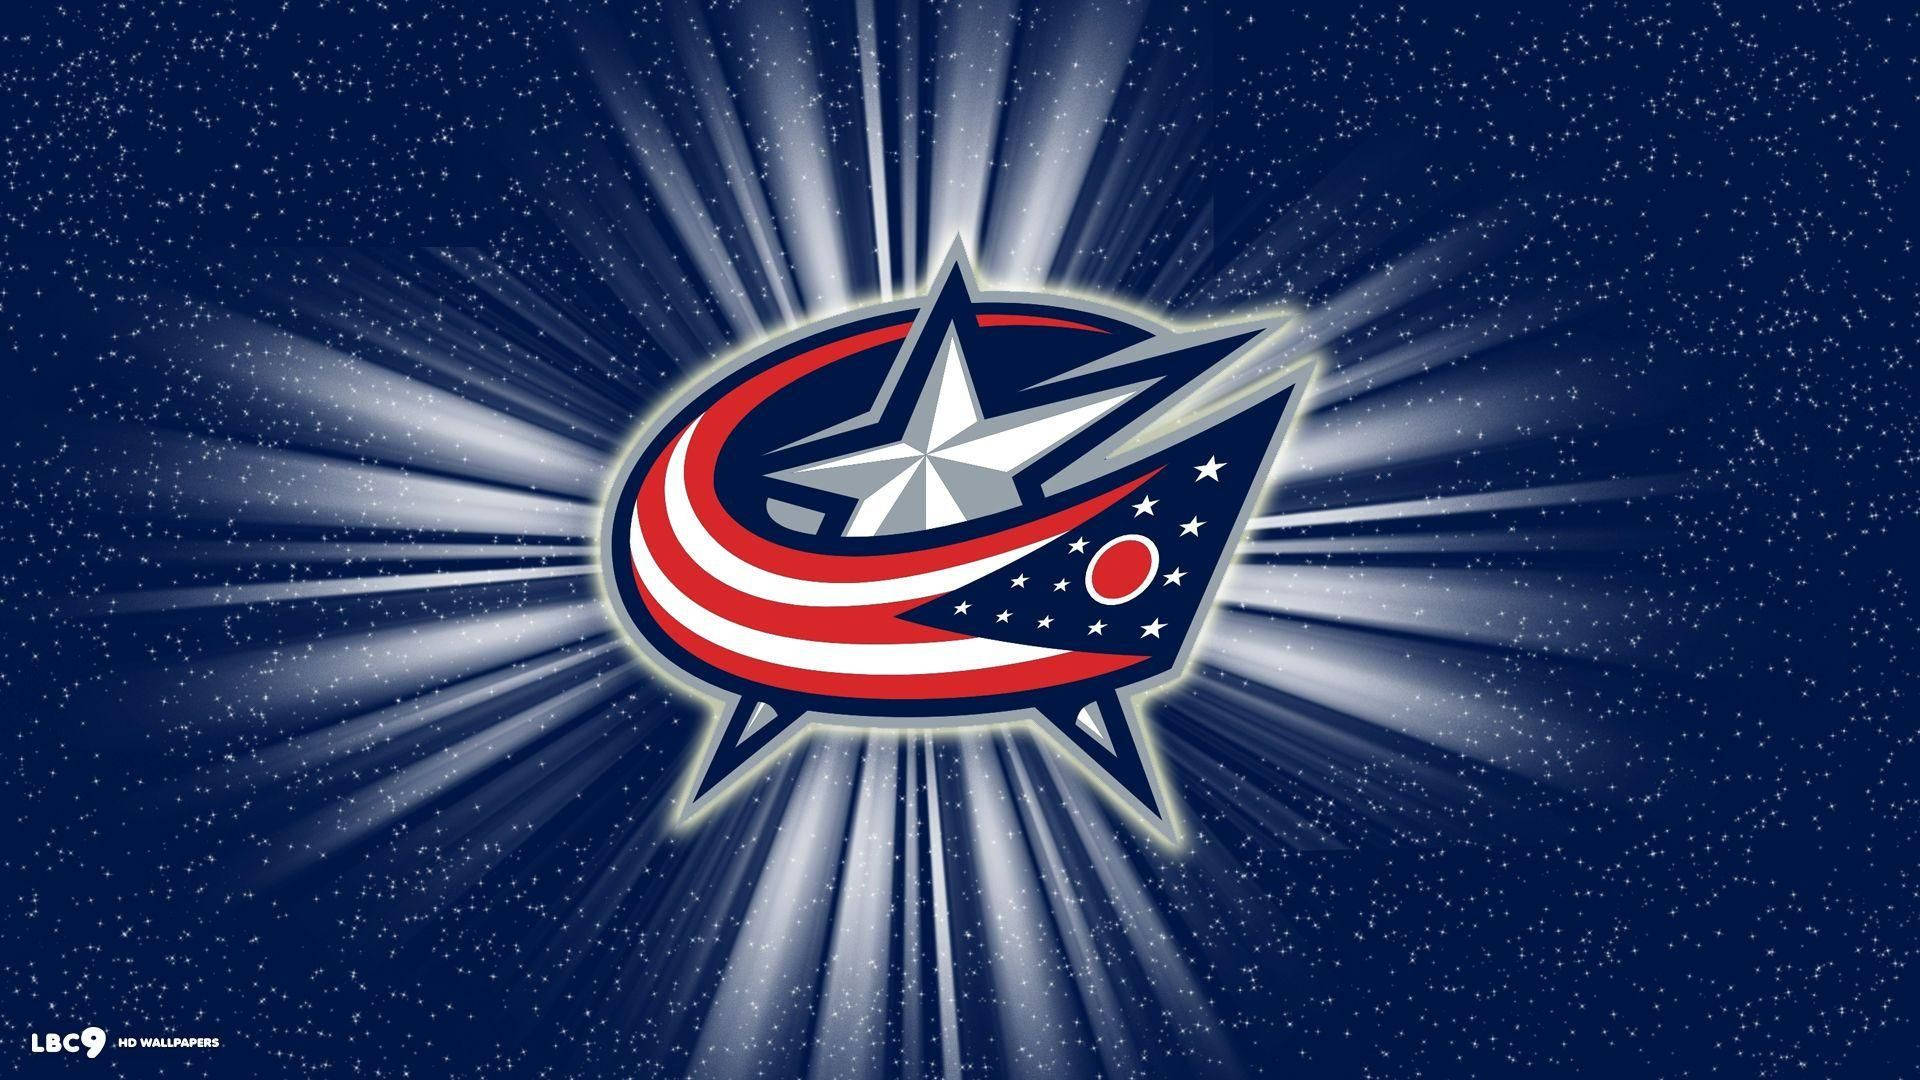 Top 999+ Columbus Blue Jackets Wallpaper Full HD, 4K✅Free to Use